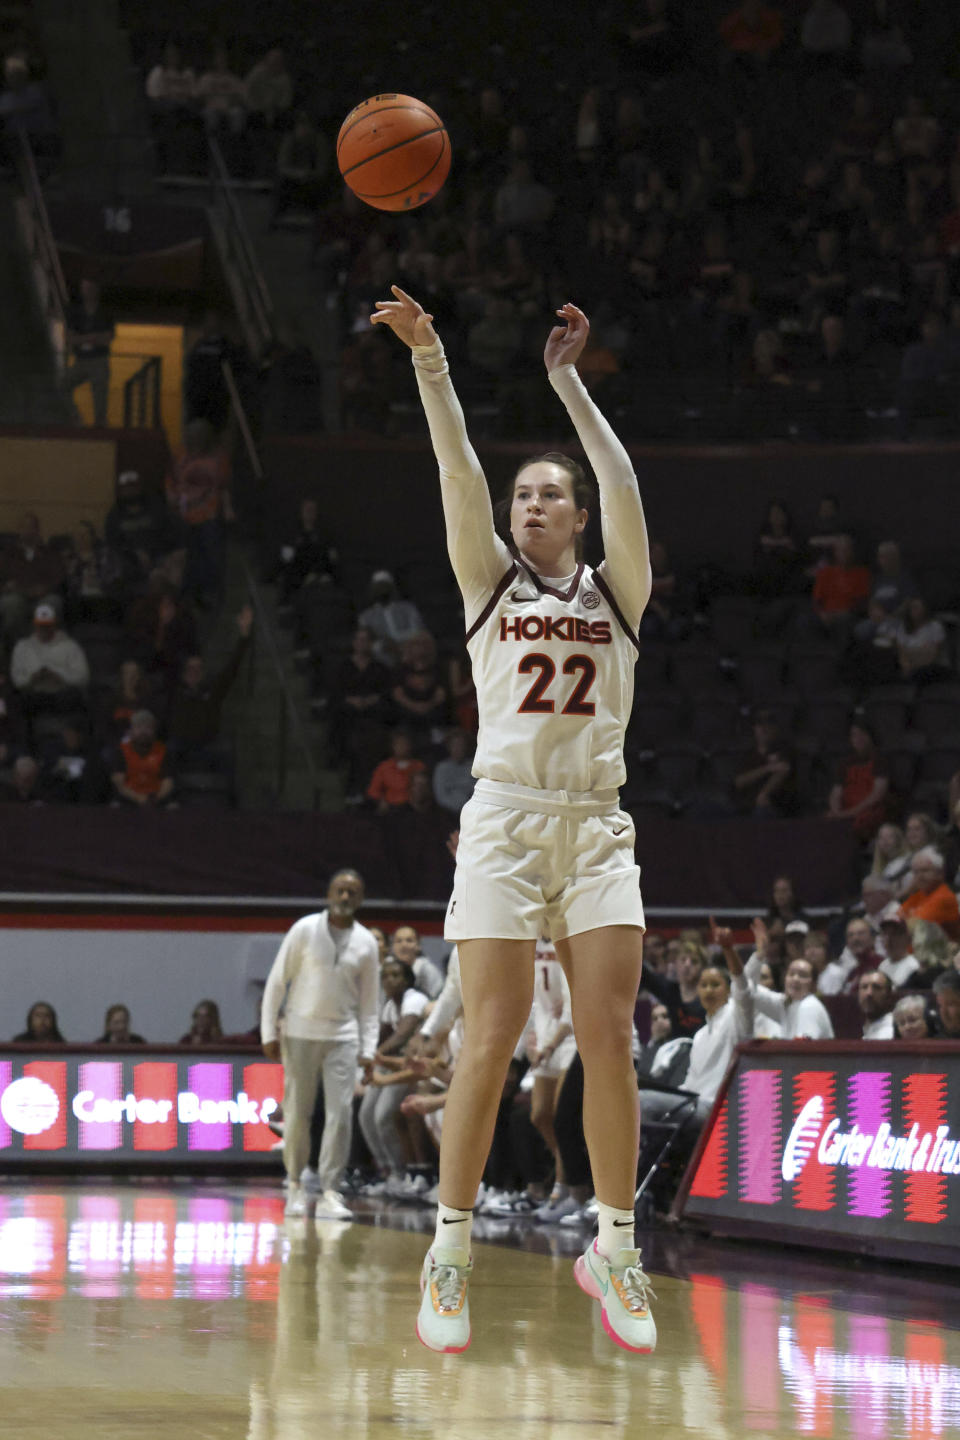 Virginia Tech's Cayla King (22) scores a 3-point basket in the first half of an NCAA college basketball game against High Point in Blacksburg Va., Monday, Nov. 6 2023. (Matt Gentry/The Roanoke Times via AP)